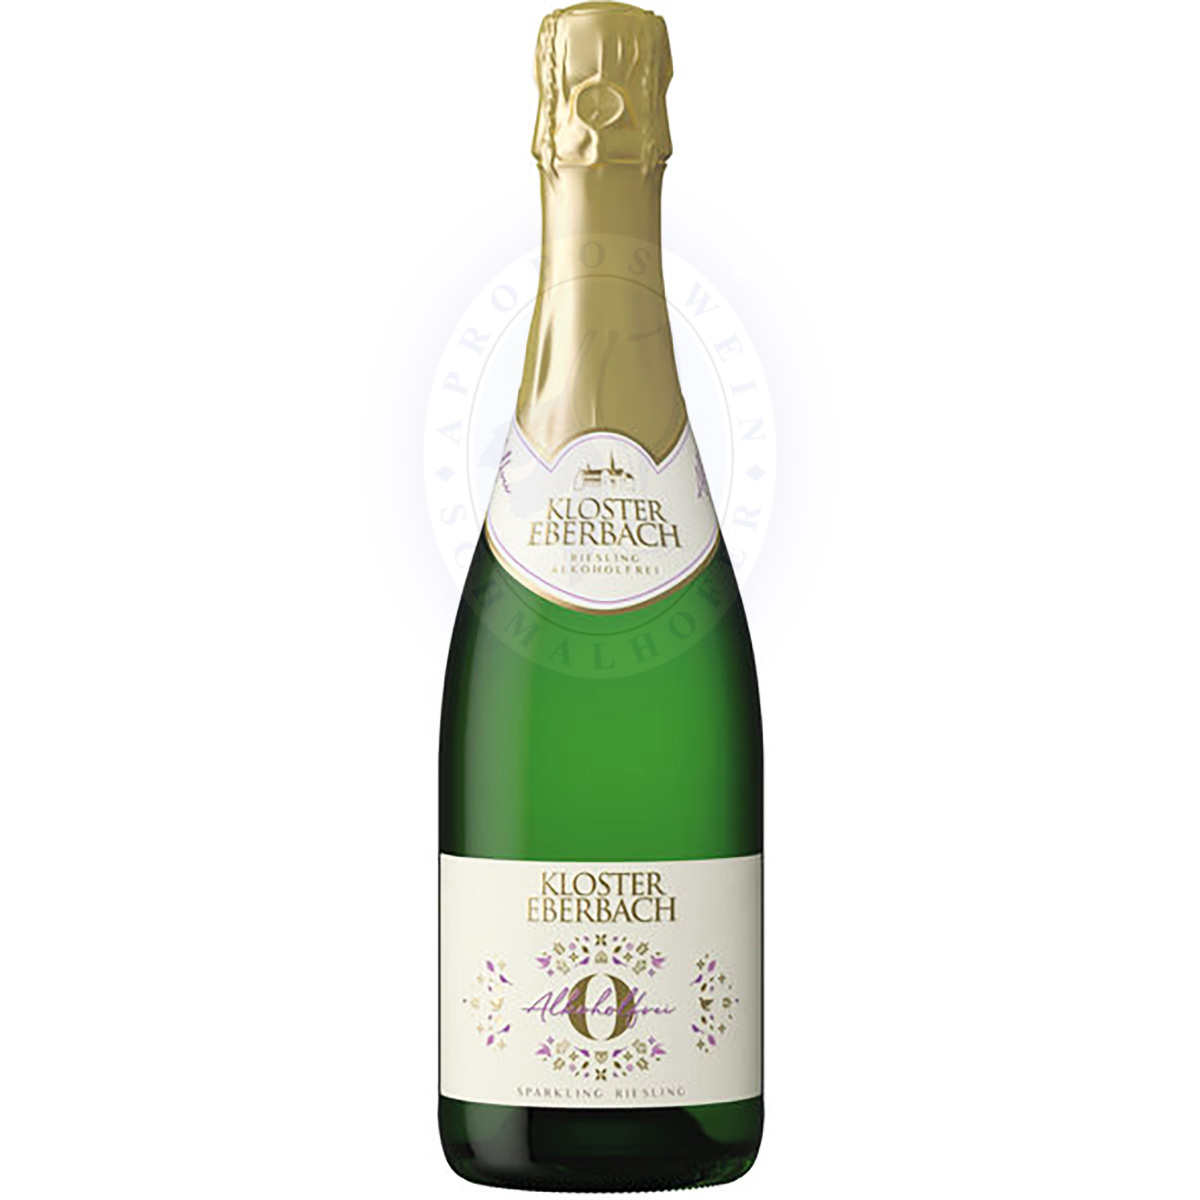 Kloster Eberbach Sparkling Riesling alkoholfrei 0,75l